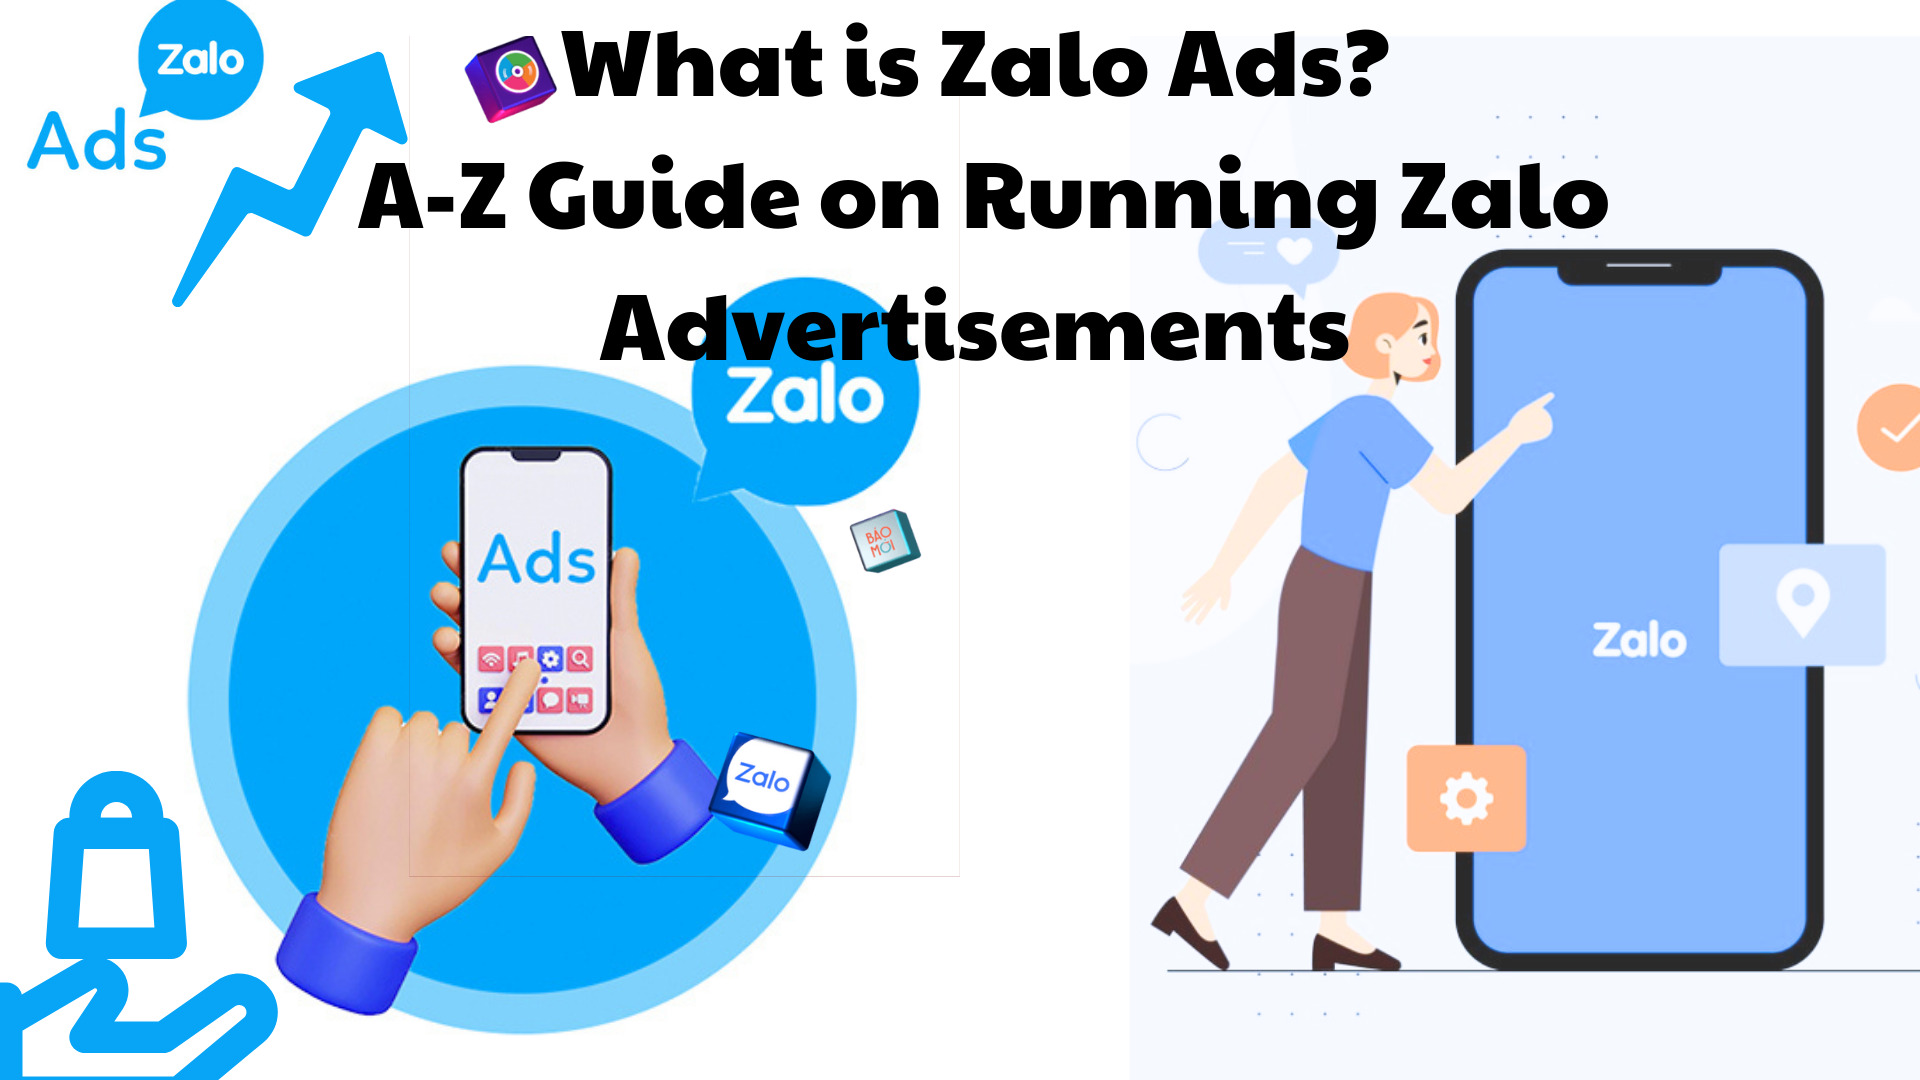 What is Zalo Ads? A-Z Guide on Running Zalo Advertisements